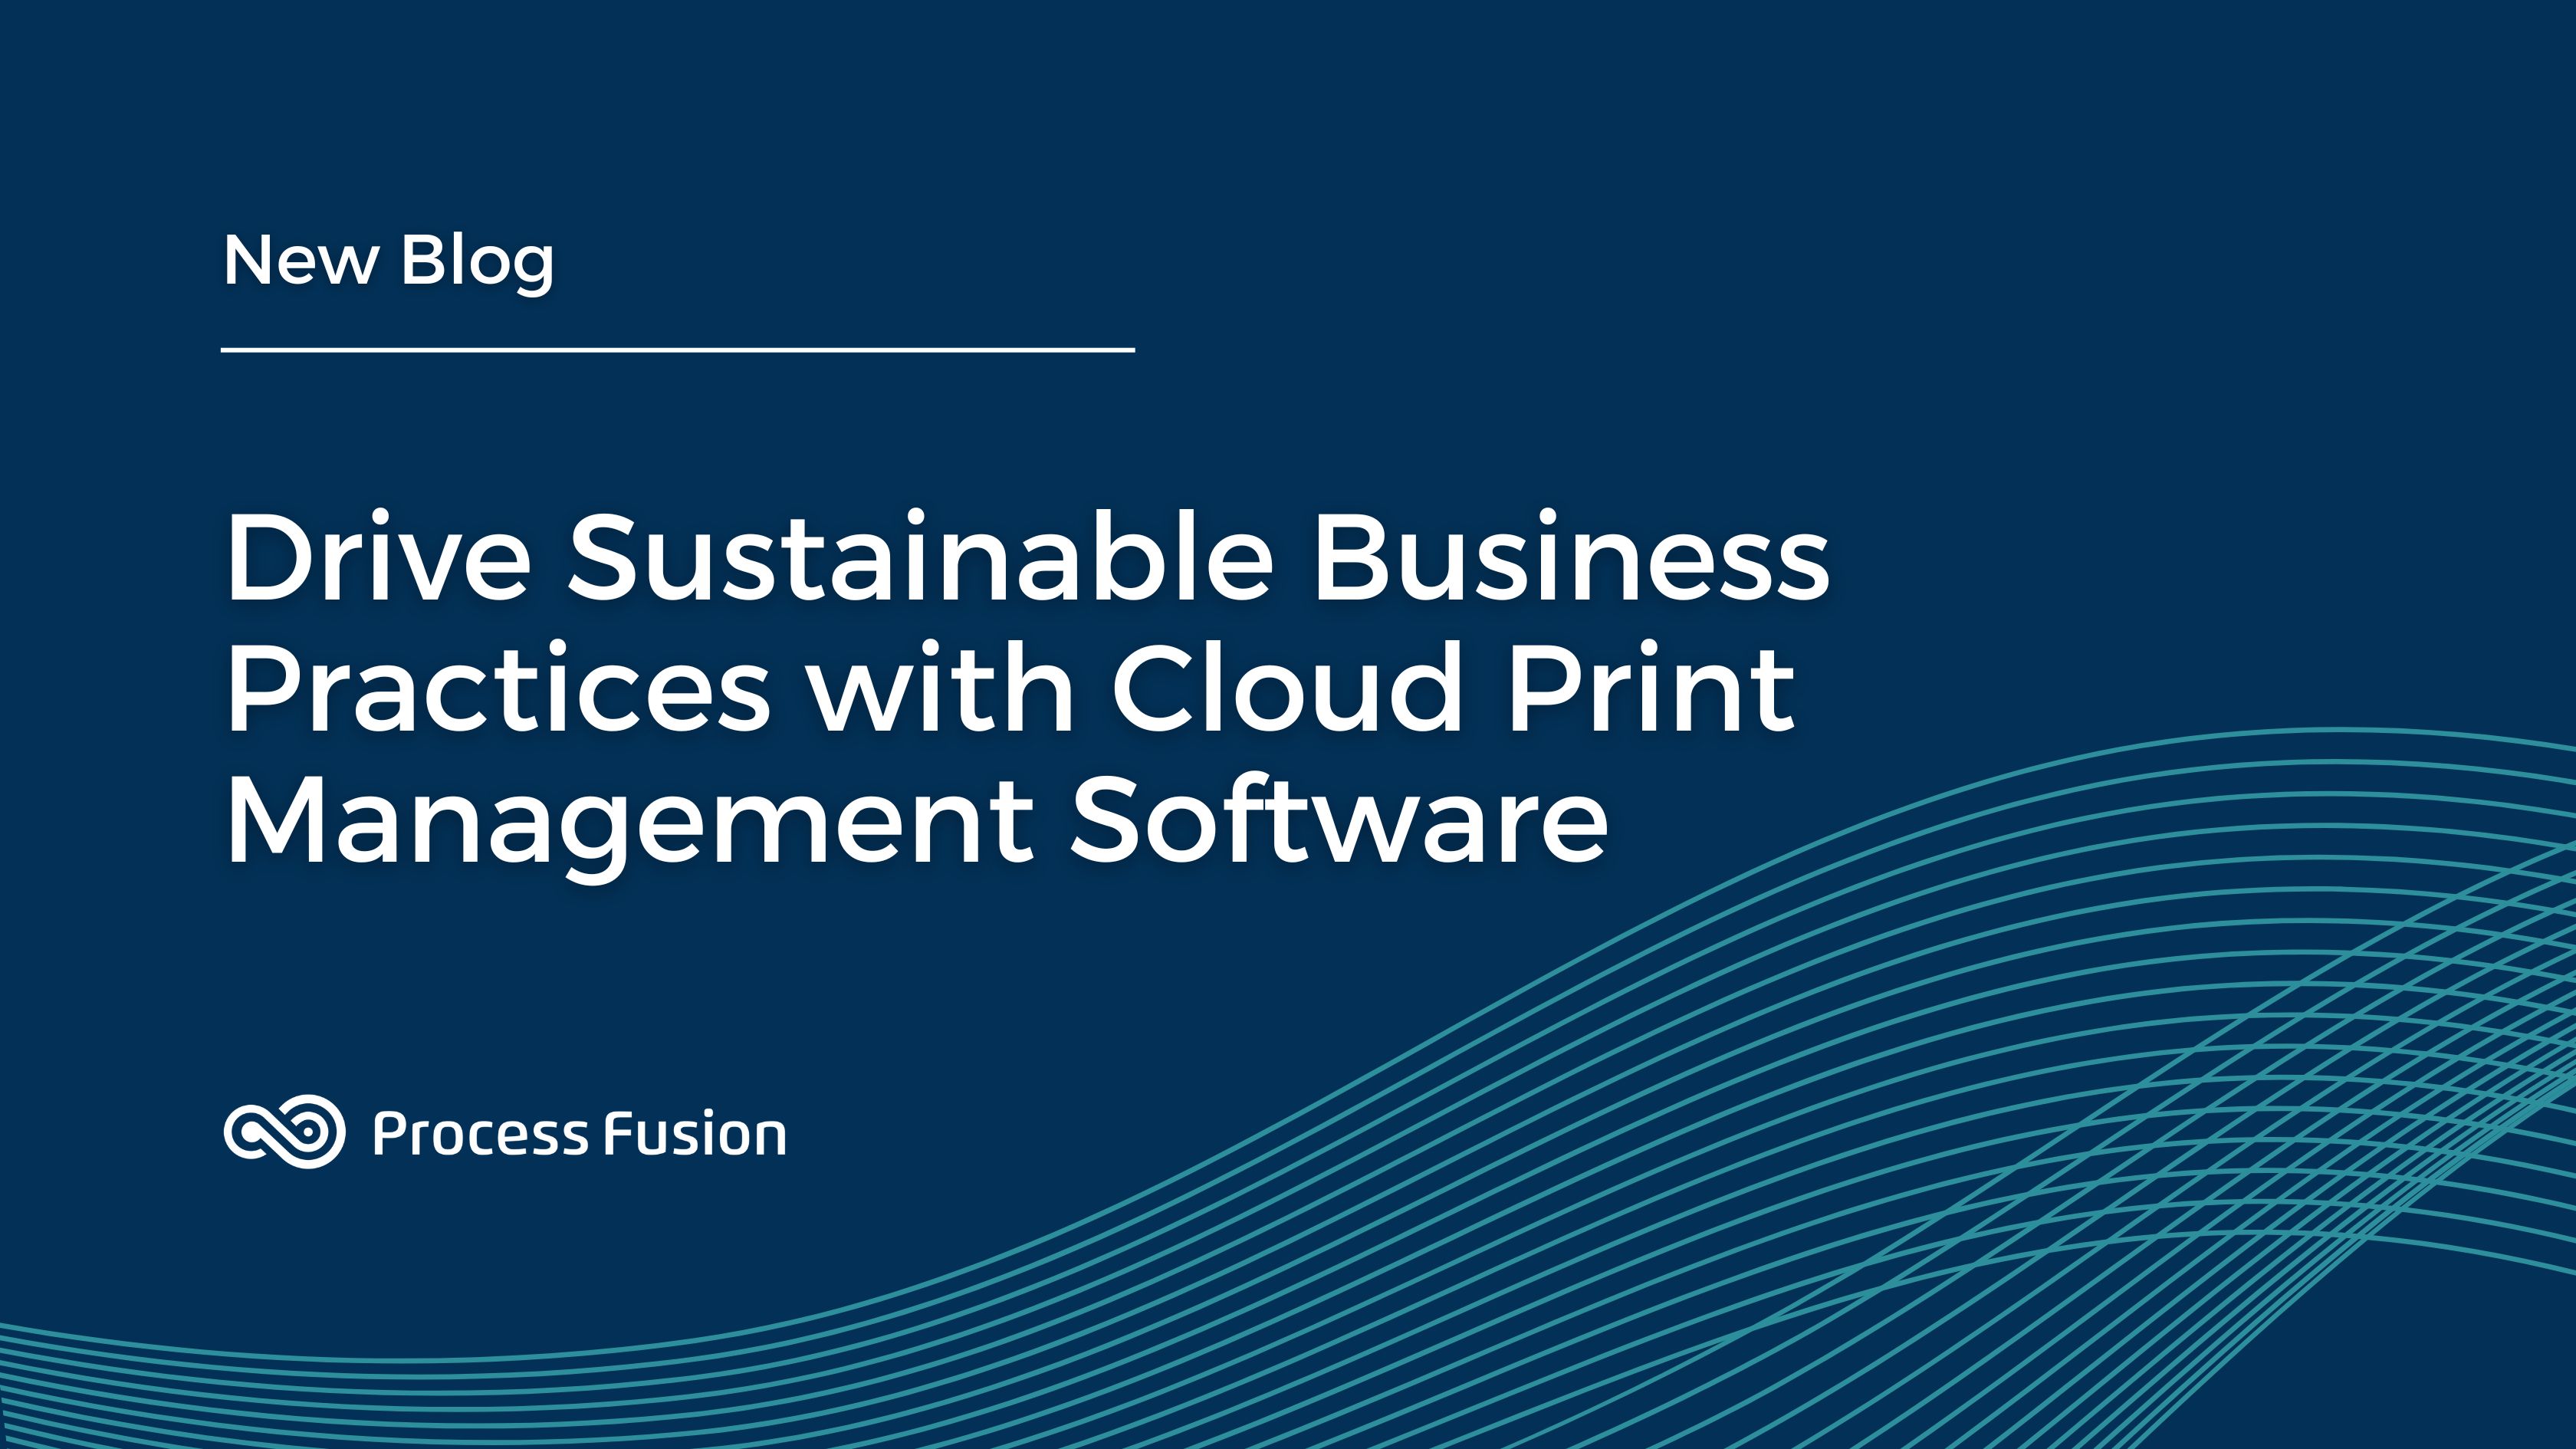 How the Cloud Print Management Software Drives Sustainable Business Practices?